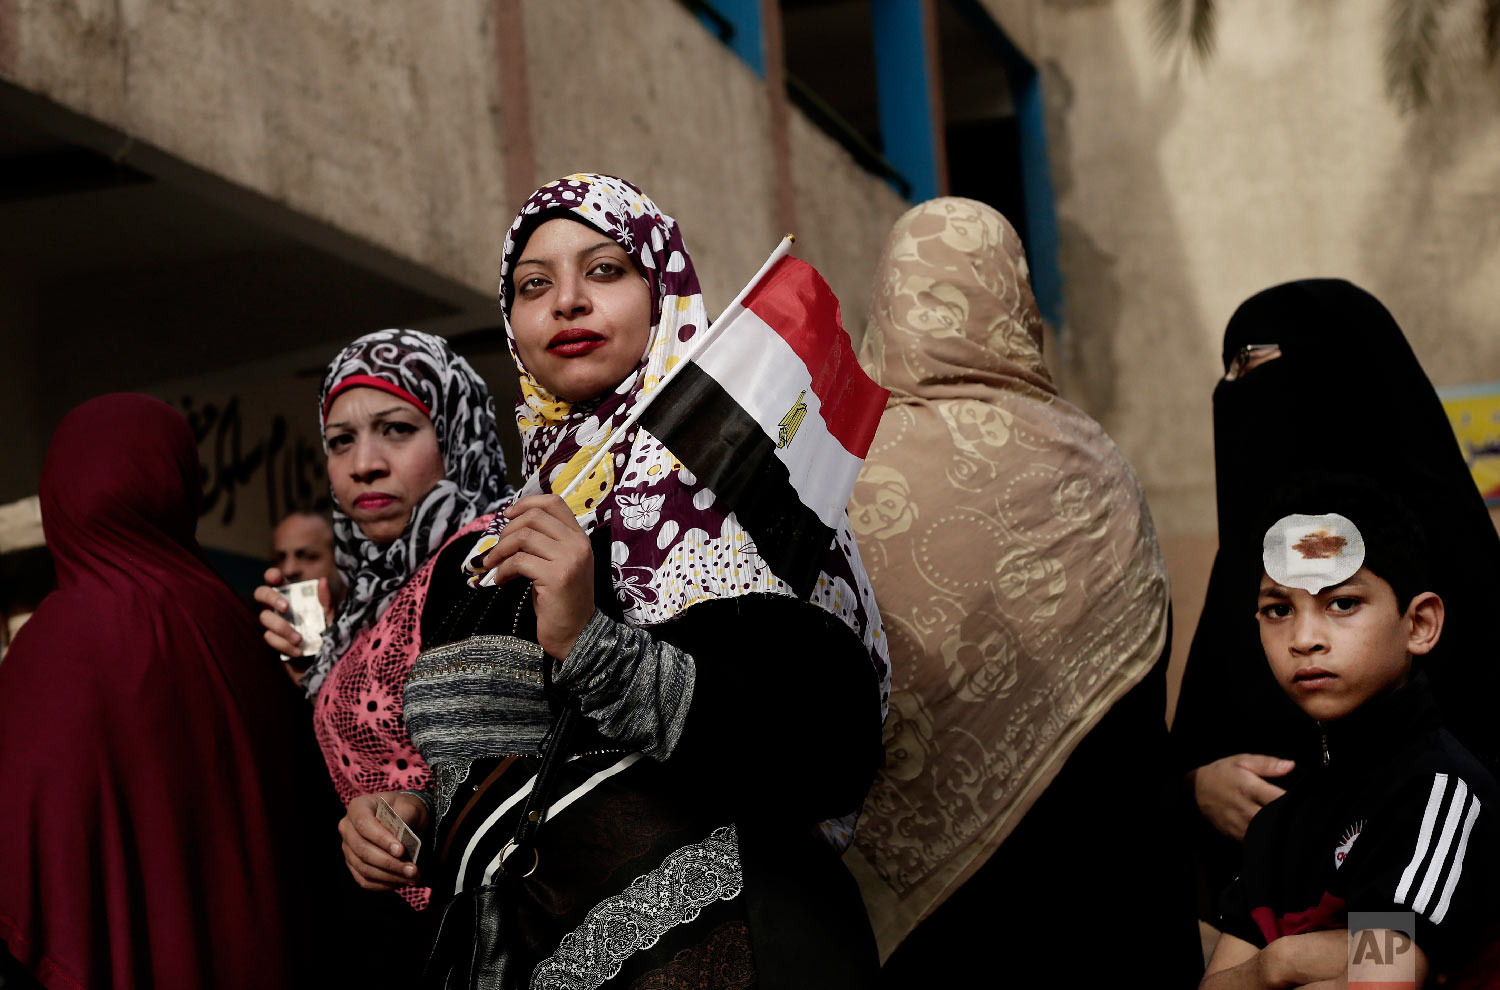  Women wait in line to vote outside a polling station at a school in the Omraniyah district of Giza, Egypt Tuesday, March 27, 2018. (AP Photo/Nariman El-Mofty) 